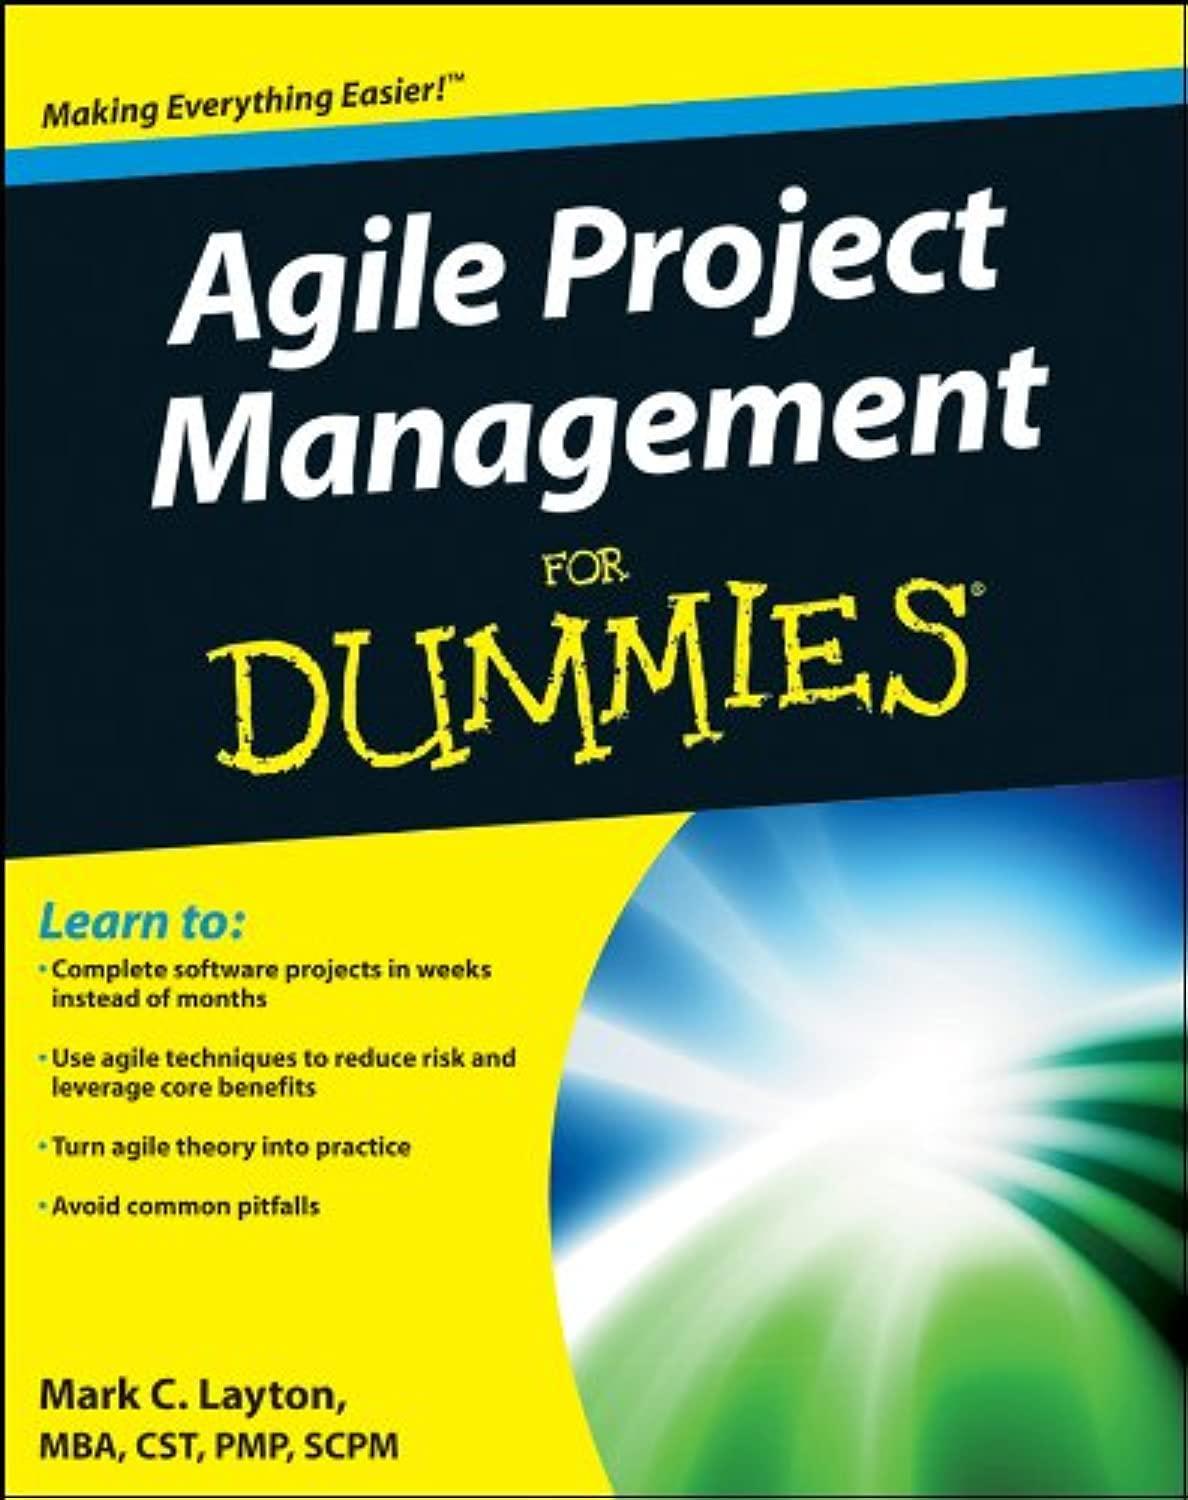 agile project management for dummies 1st edition mark c. layton 1118026241, 978-1118026243